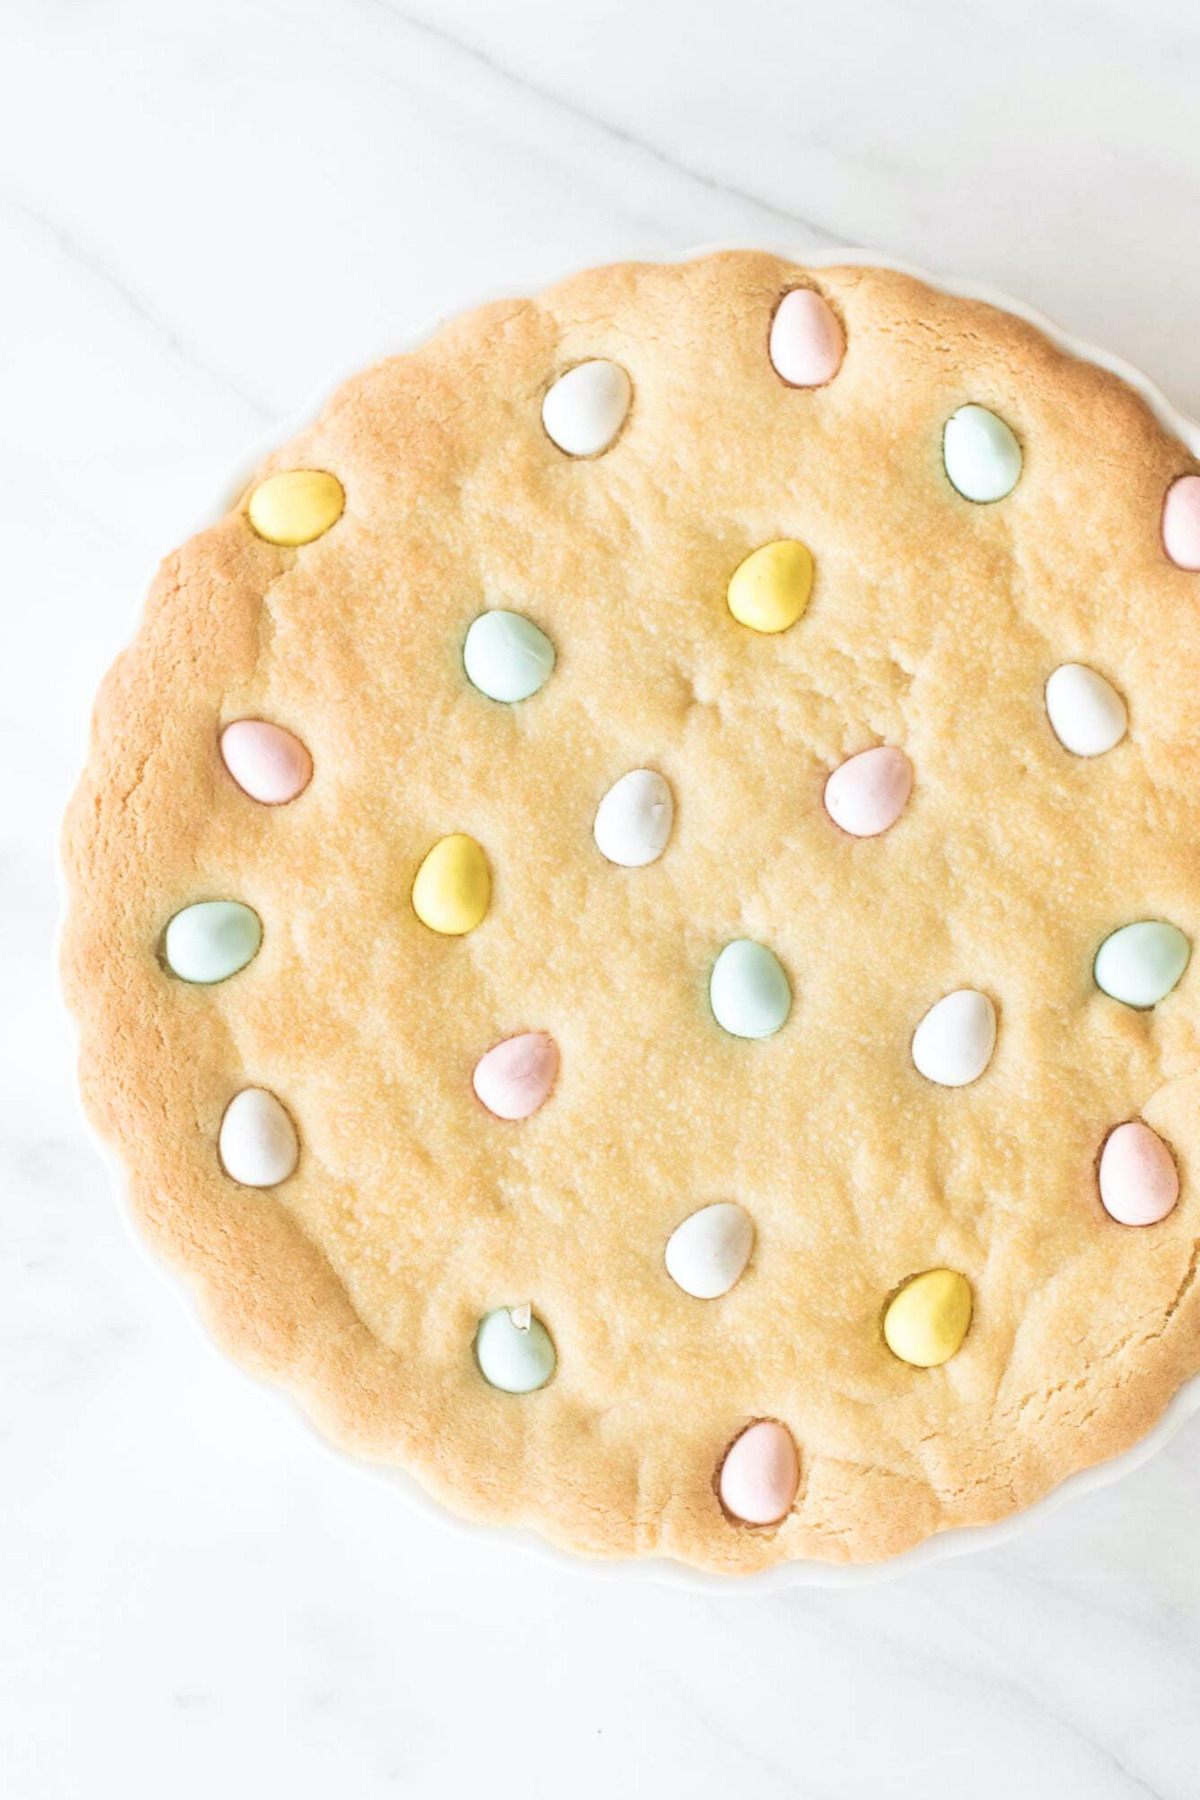 A freshly baked cookie cake with pastel-colored Cadbury Easter eggs embedded on top.